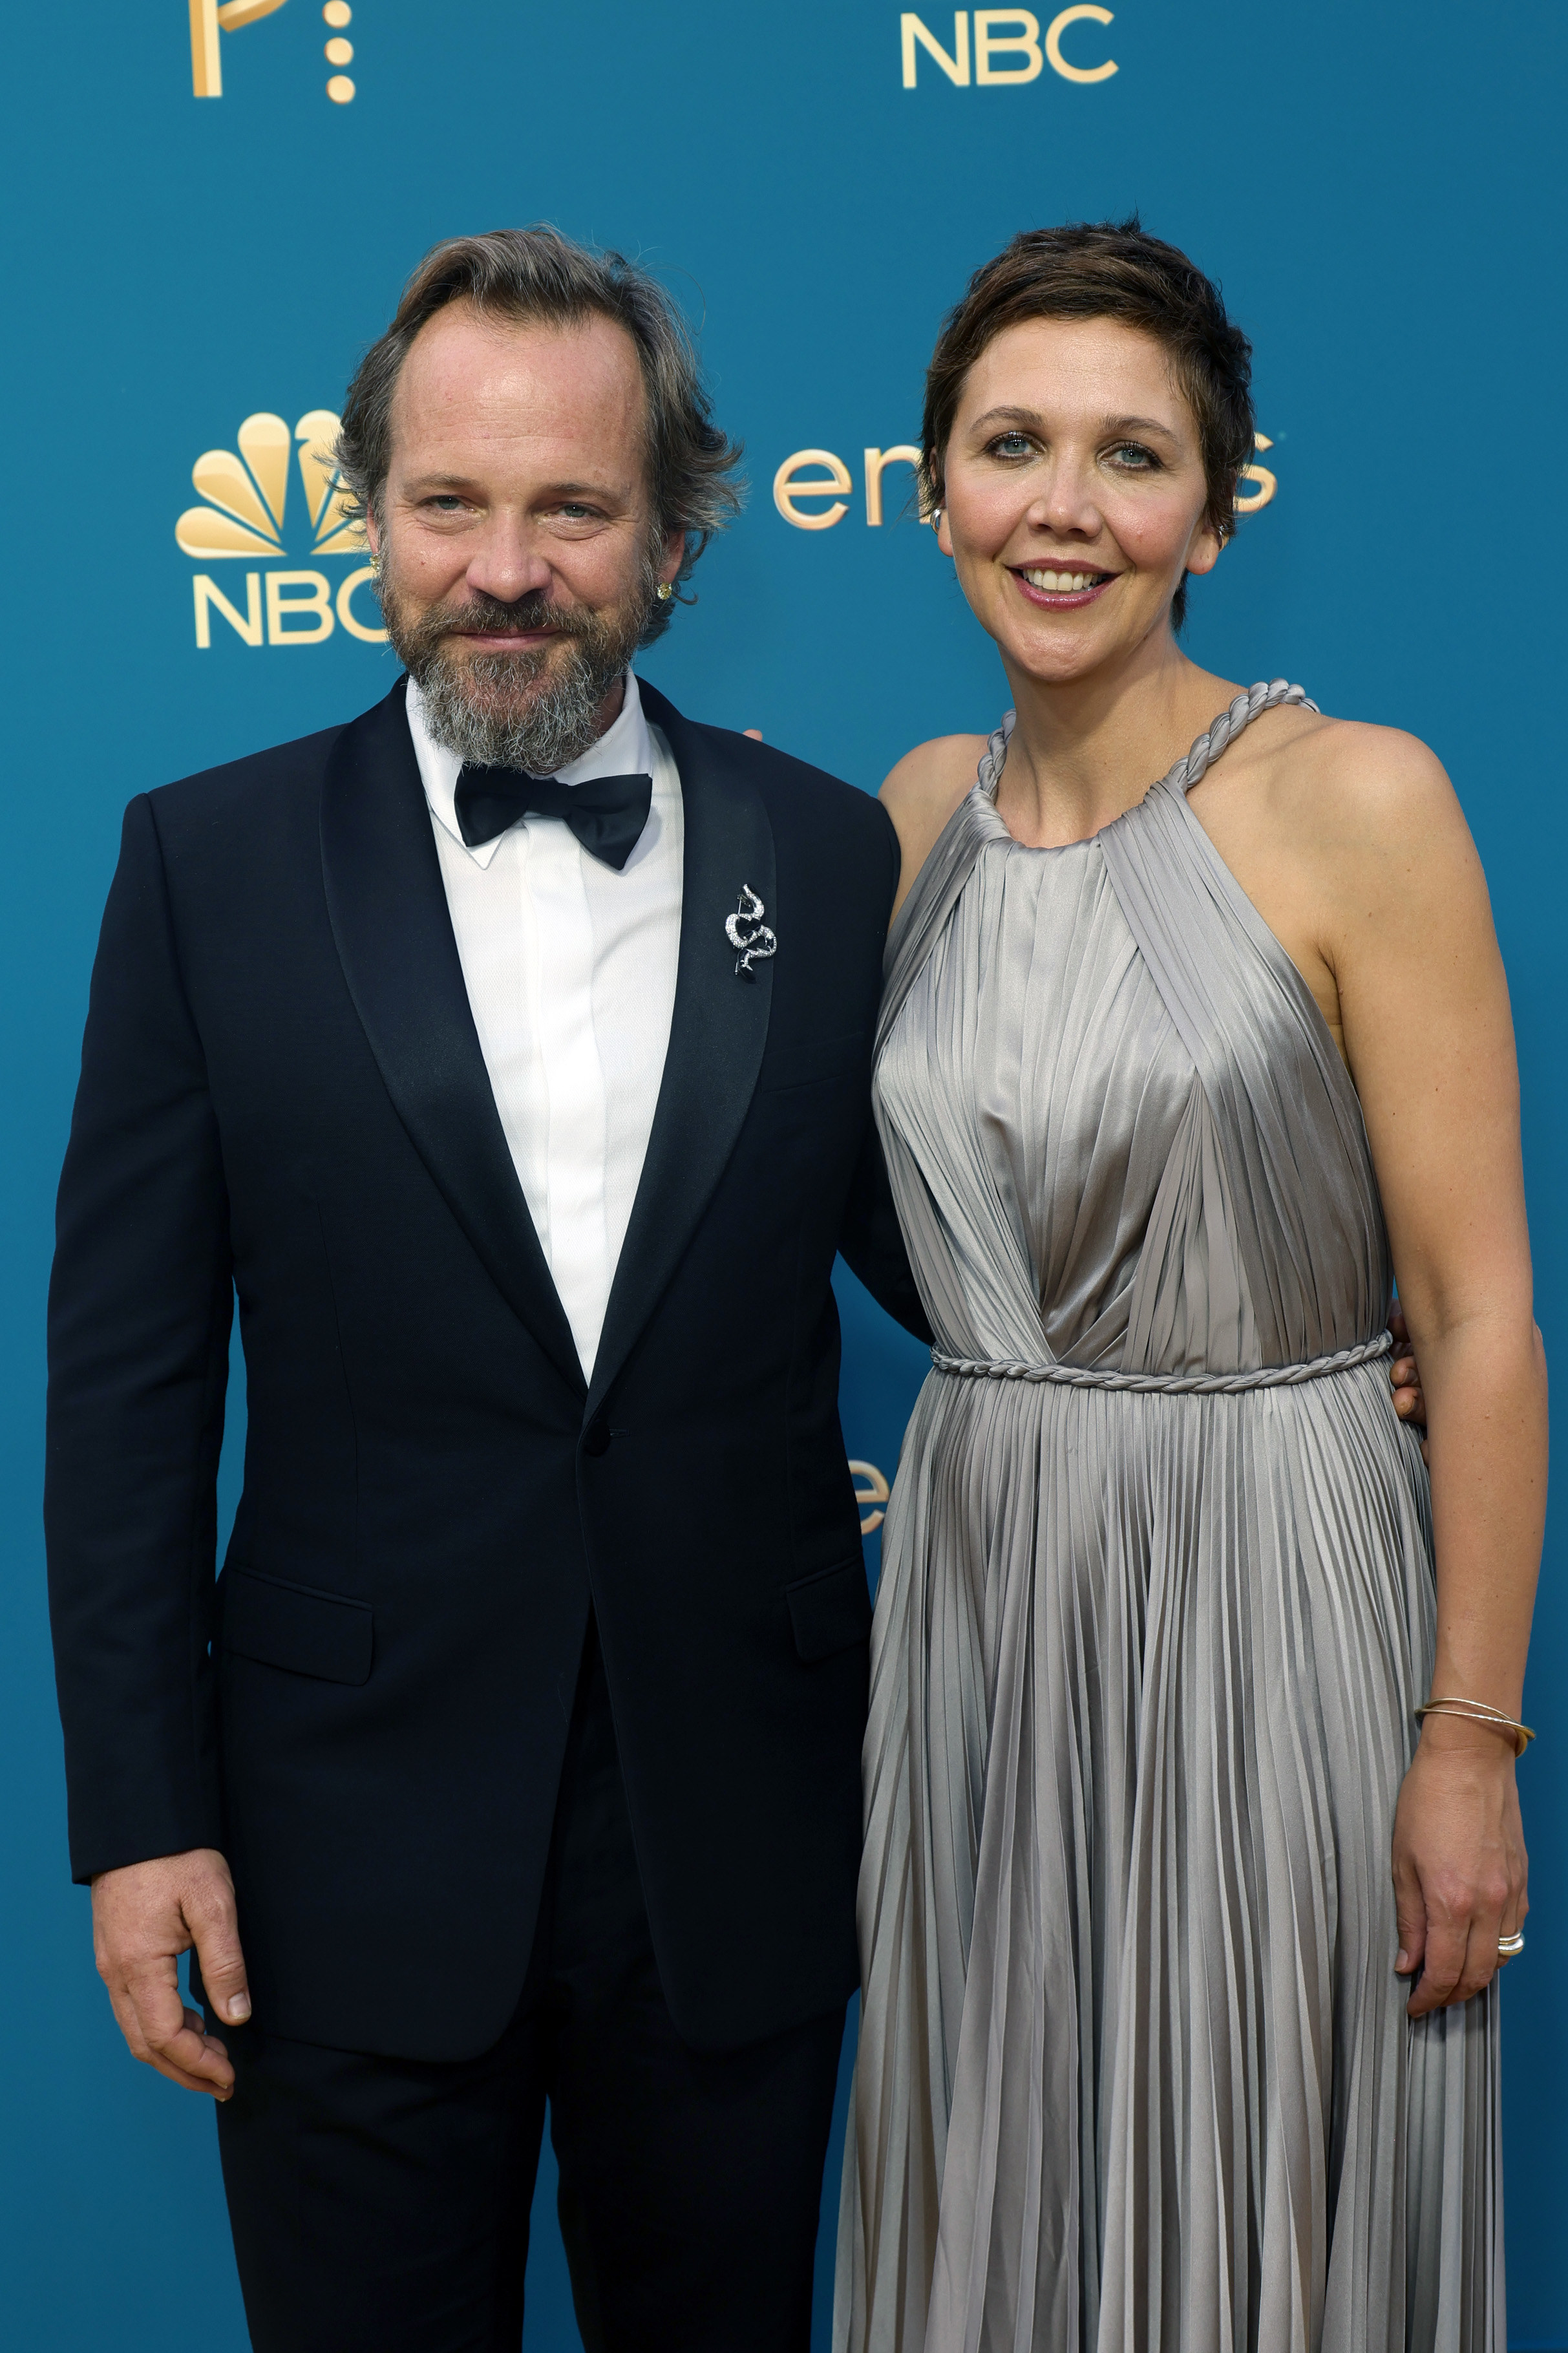 Peter Sarsgaard in a black tux and Maggie Gyllenhaal in a silver gown